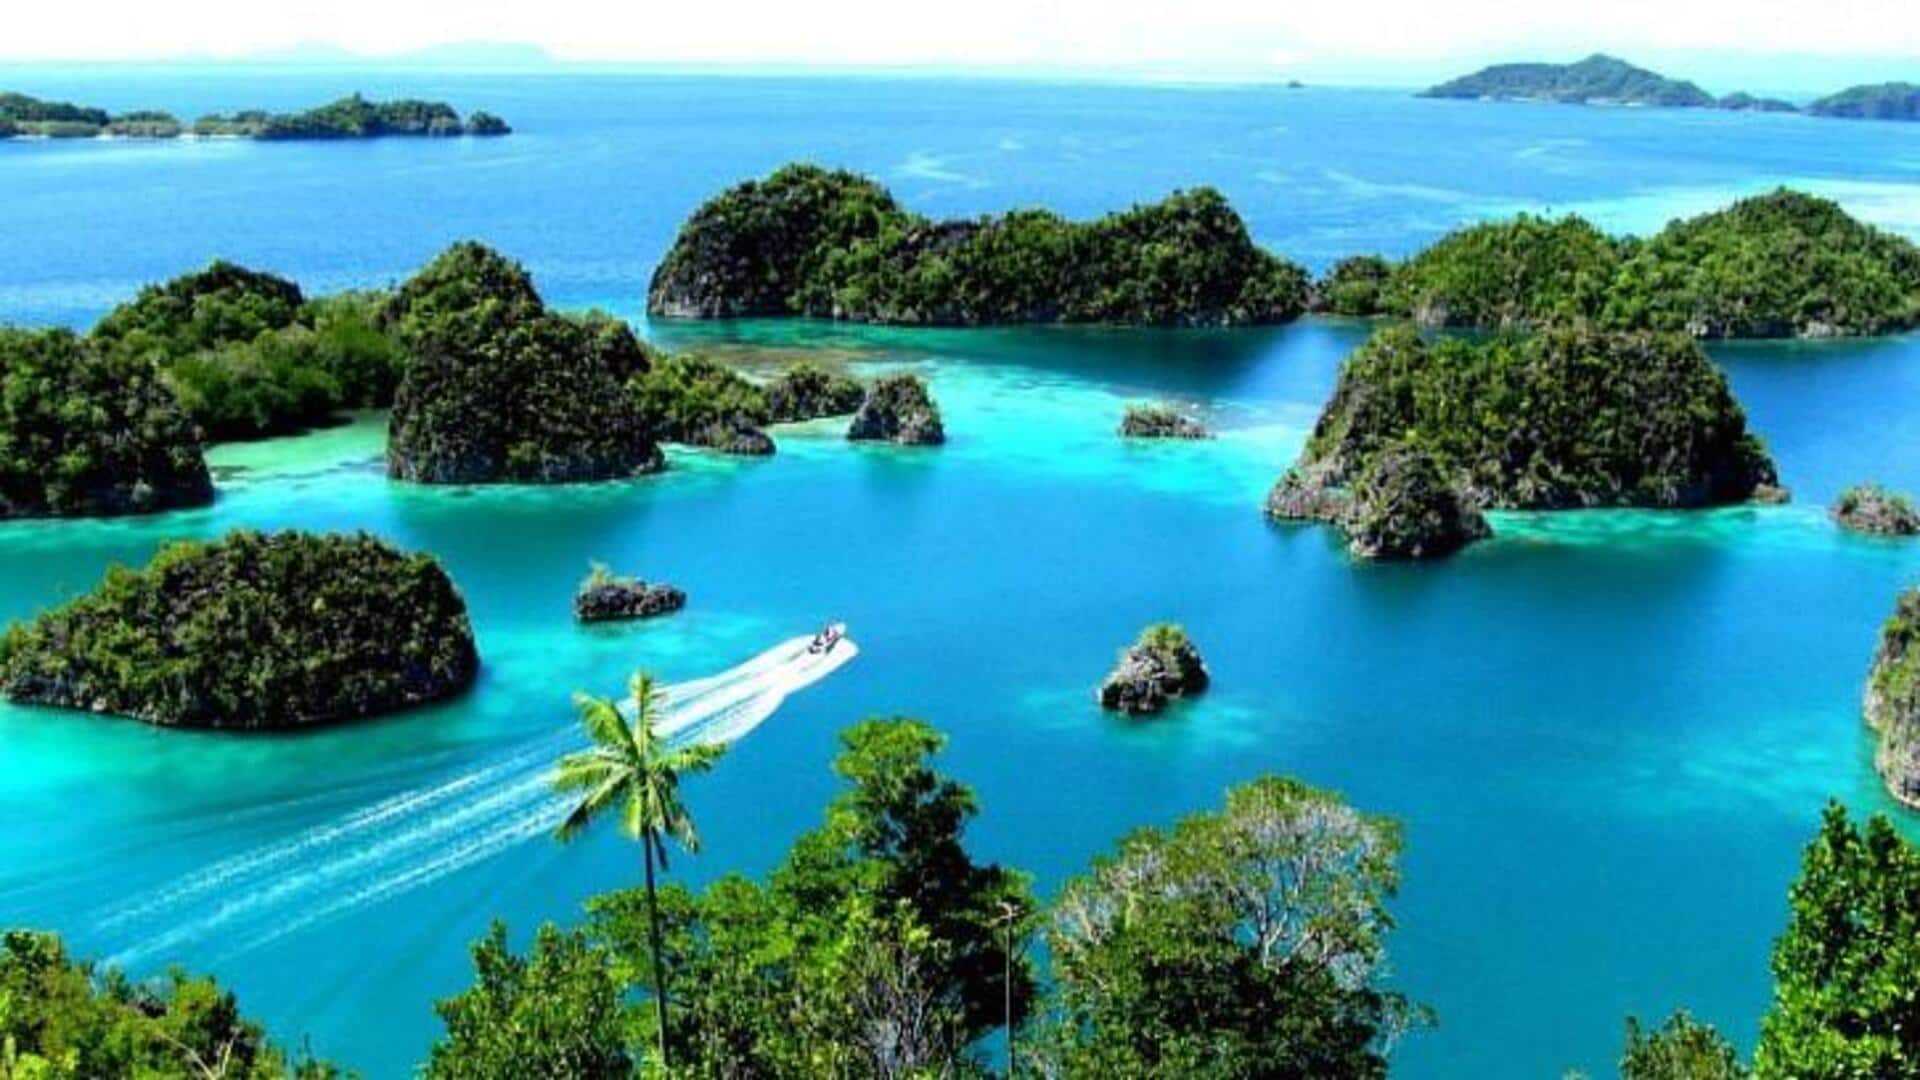 A summer trip to Raja Ampat, Indonesia: Top travel recommendations